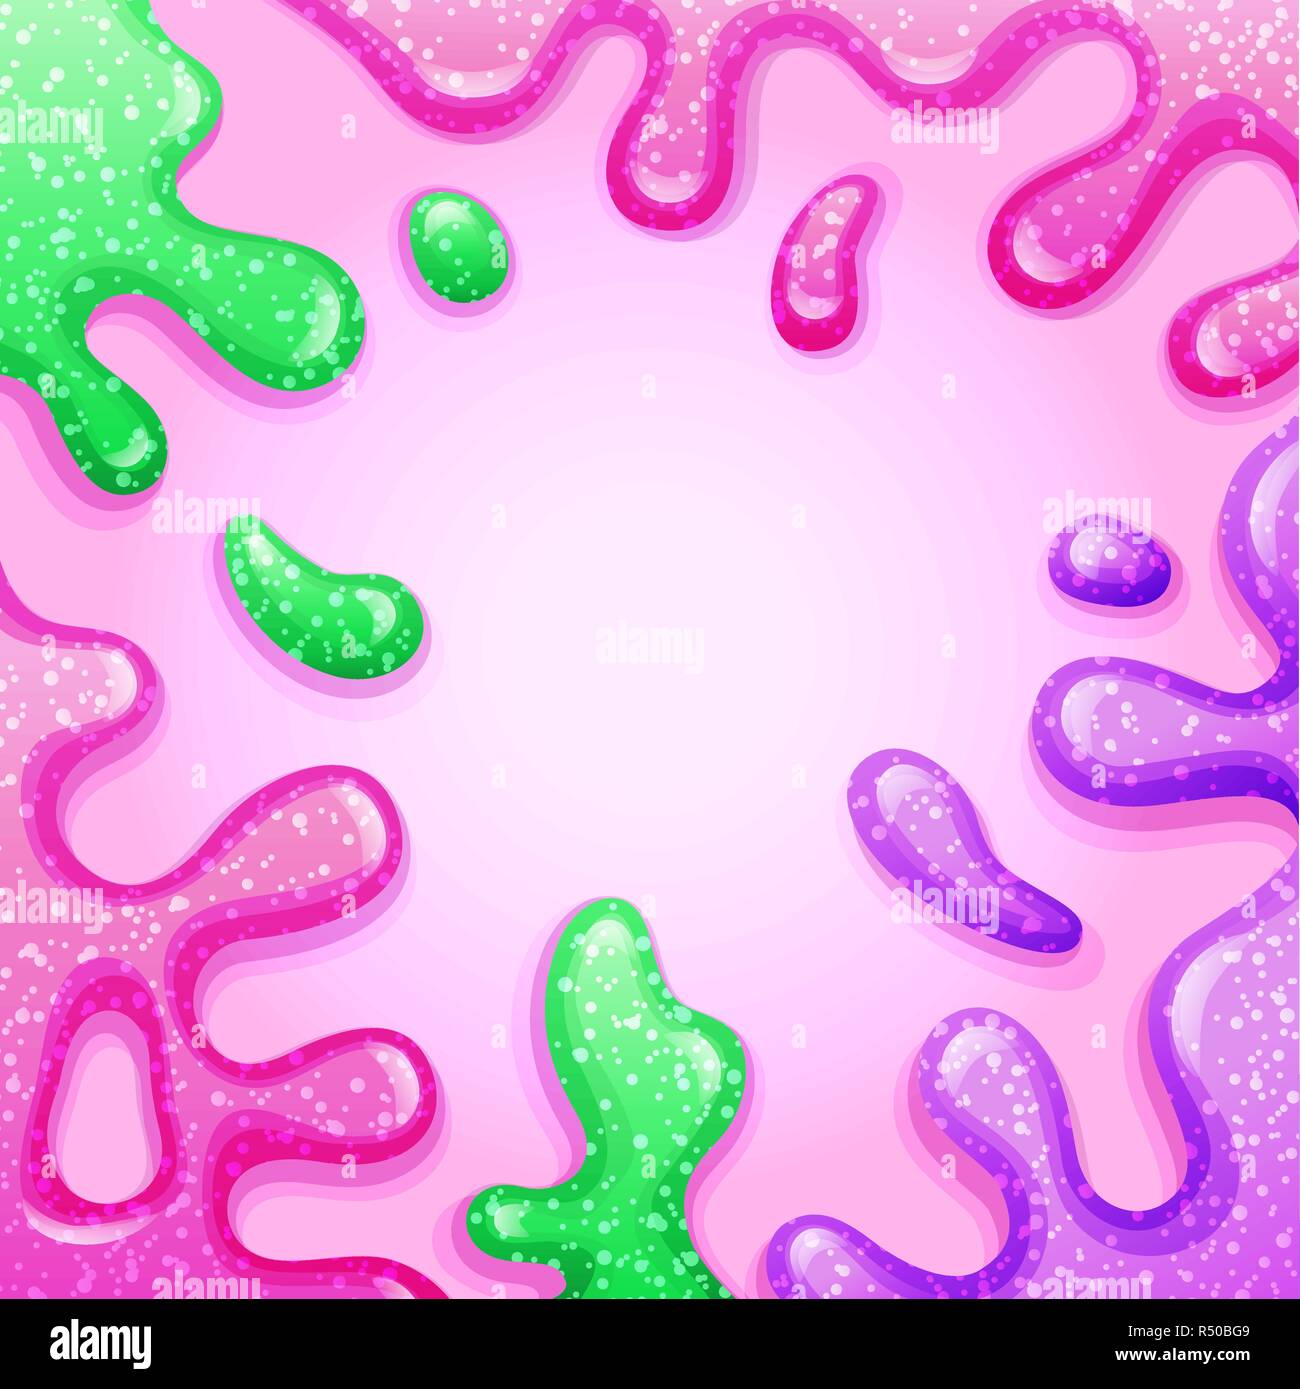 Colorful square pink background with pink purple and green splashes Stock Vector